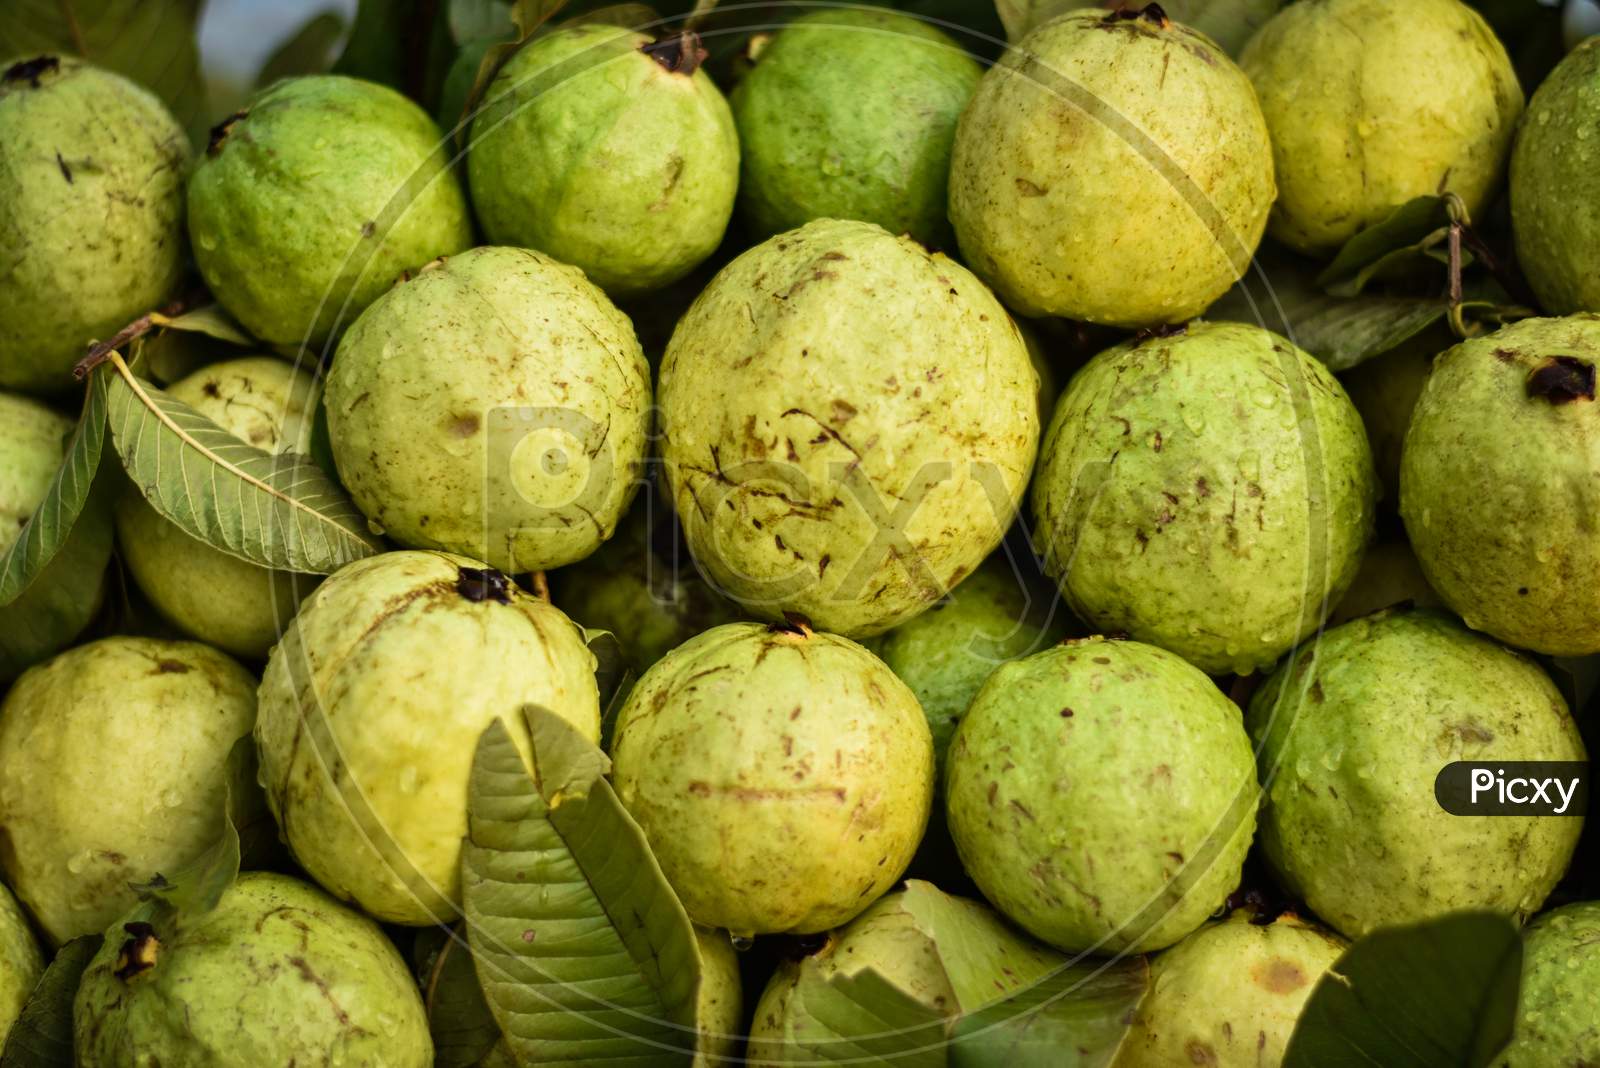 Indian fresh guava fruits on a street fruits market